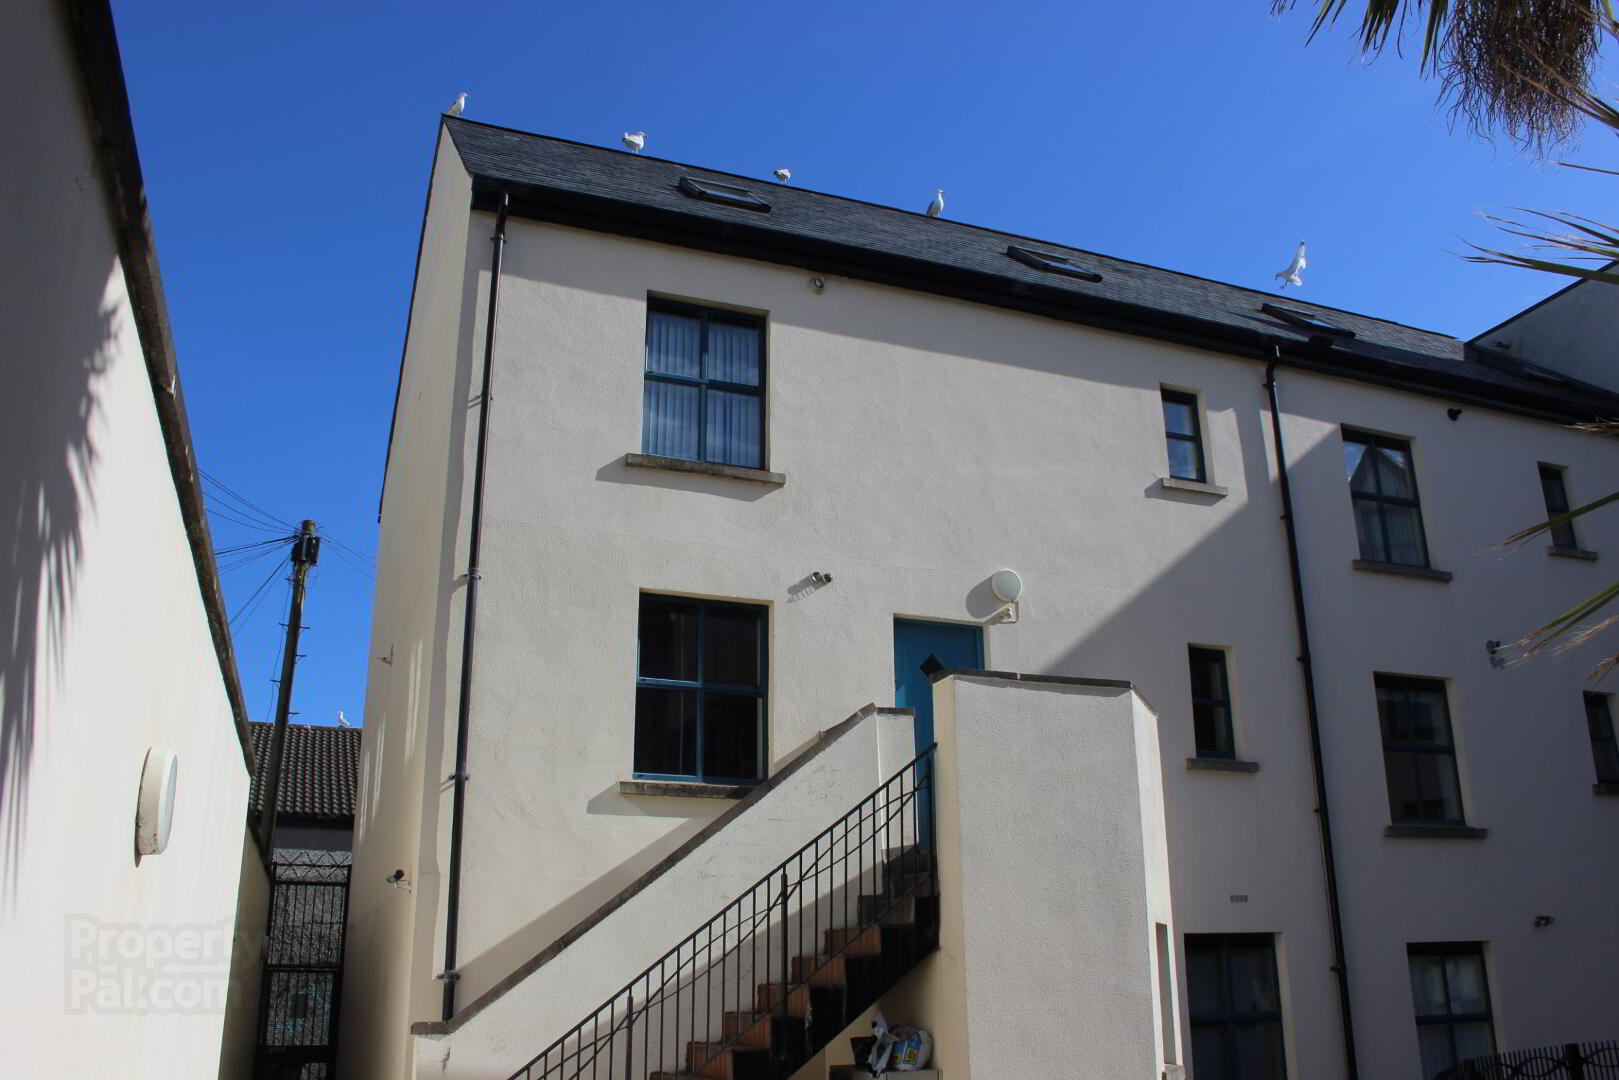 Waterfoot Apartments, A13 Main Street